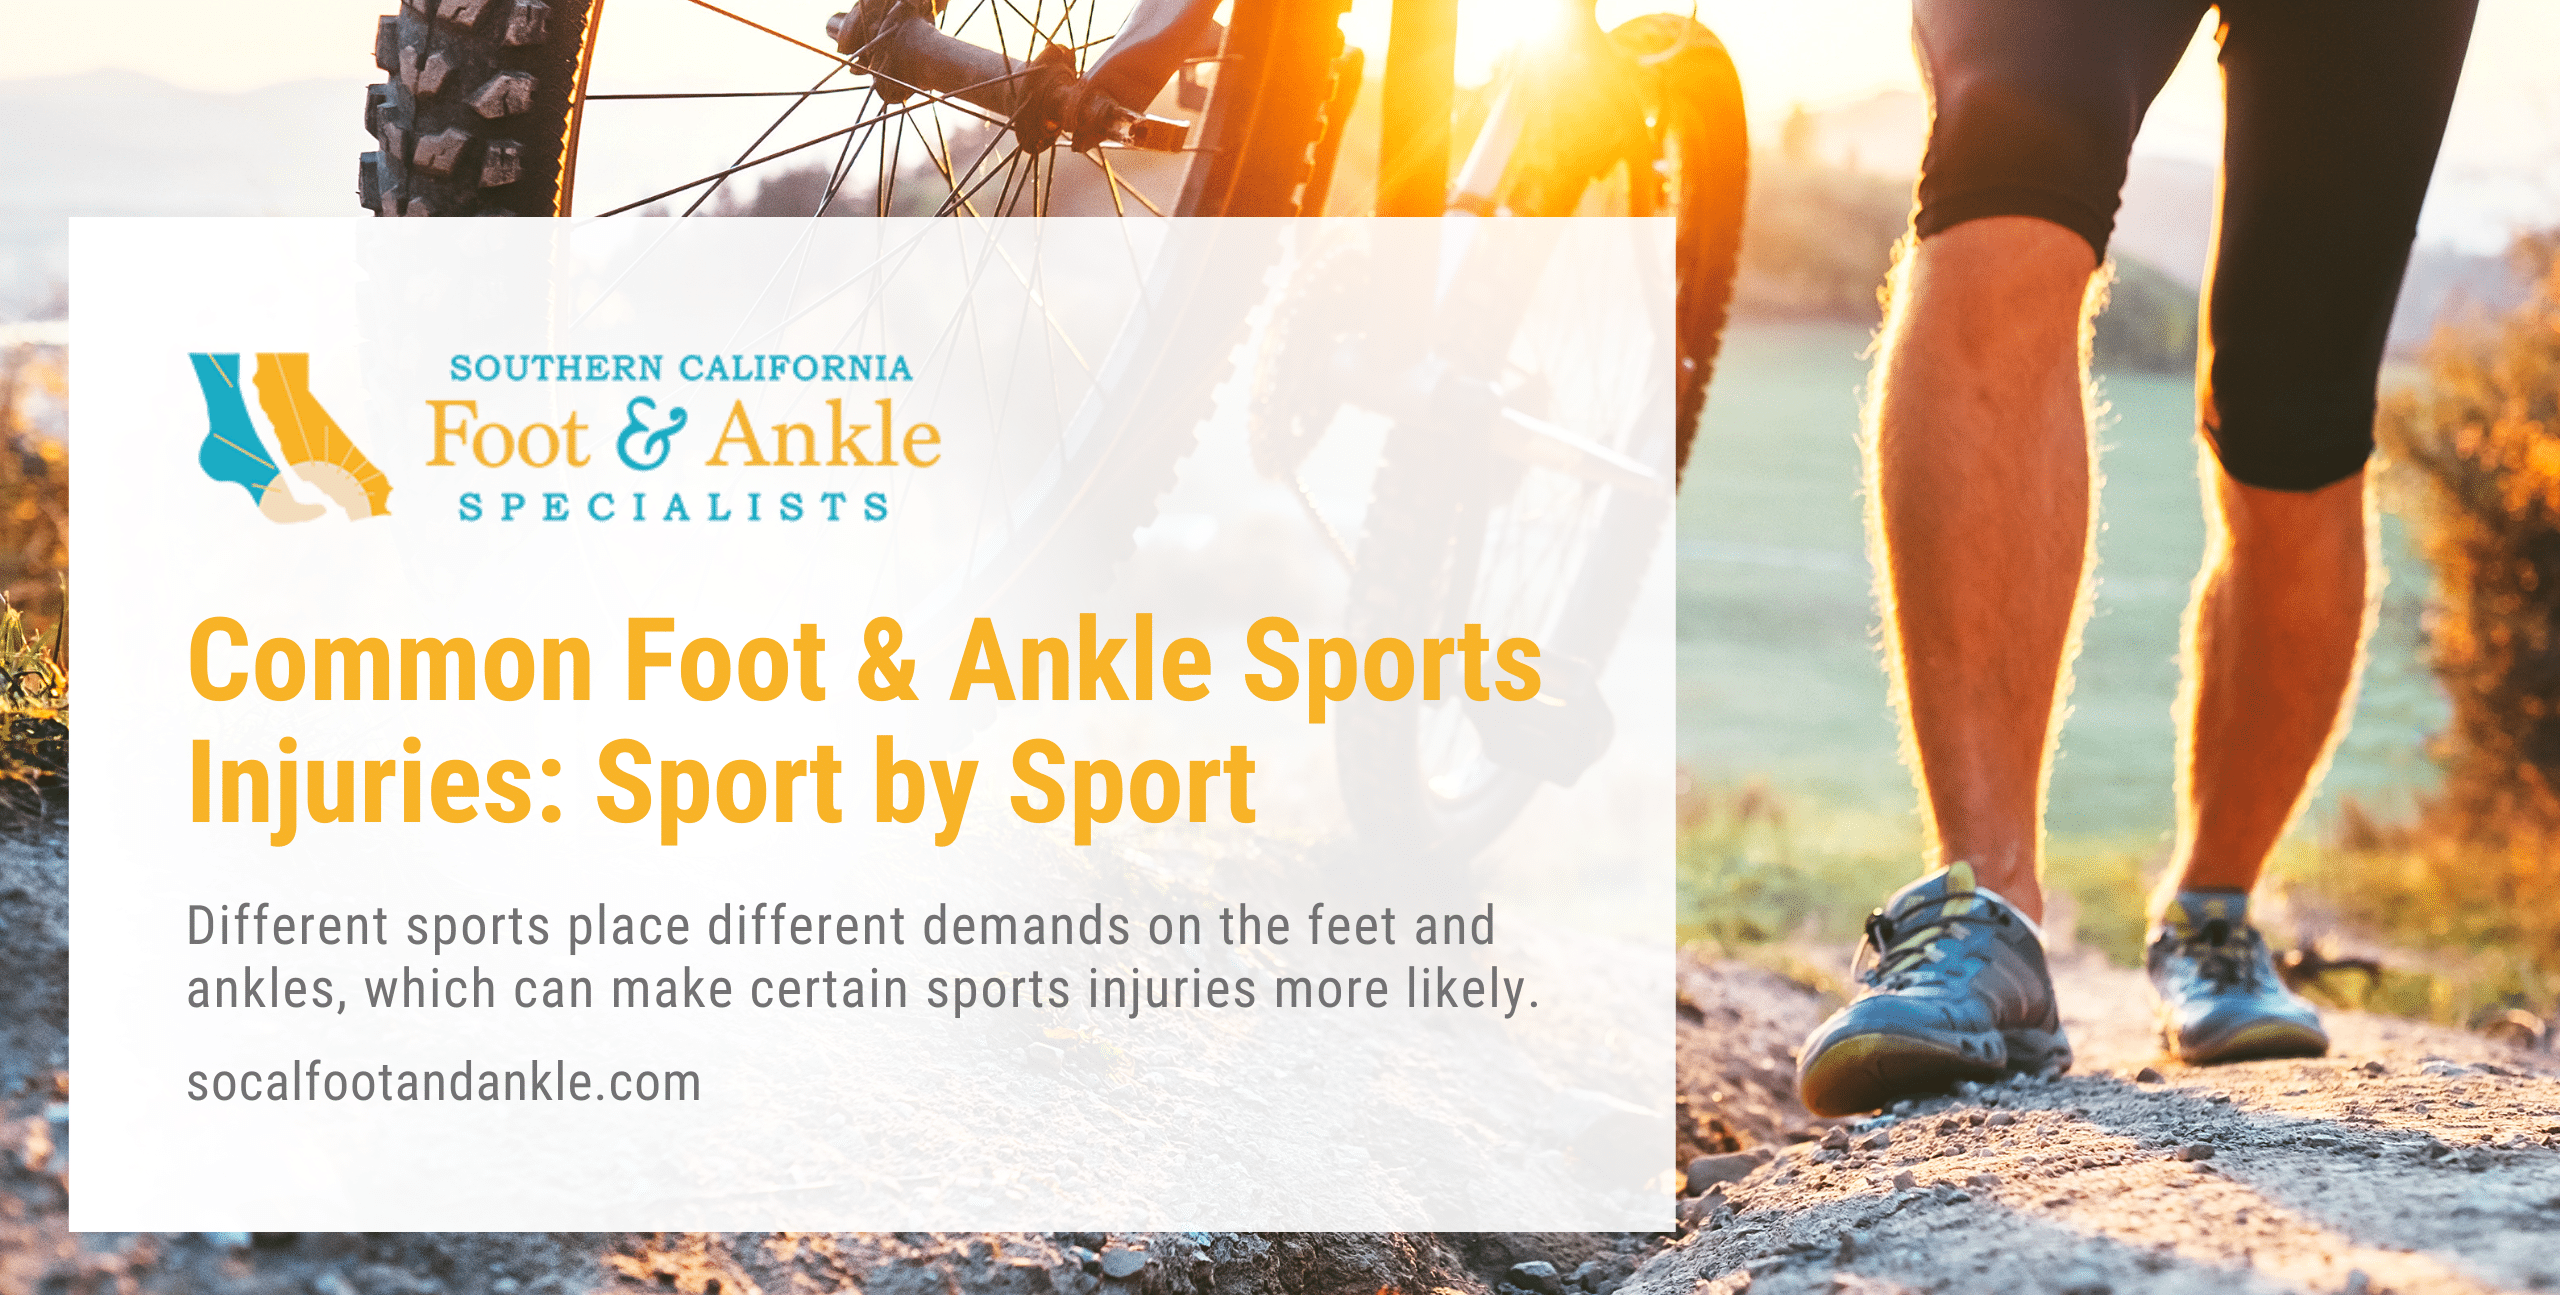 Common Foot & Ankle Sports Injuries: Sport by Sport